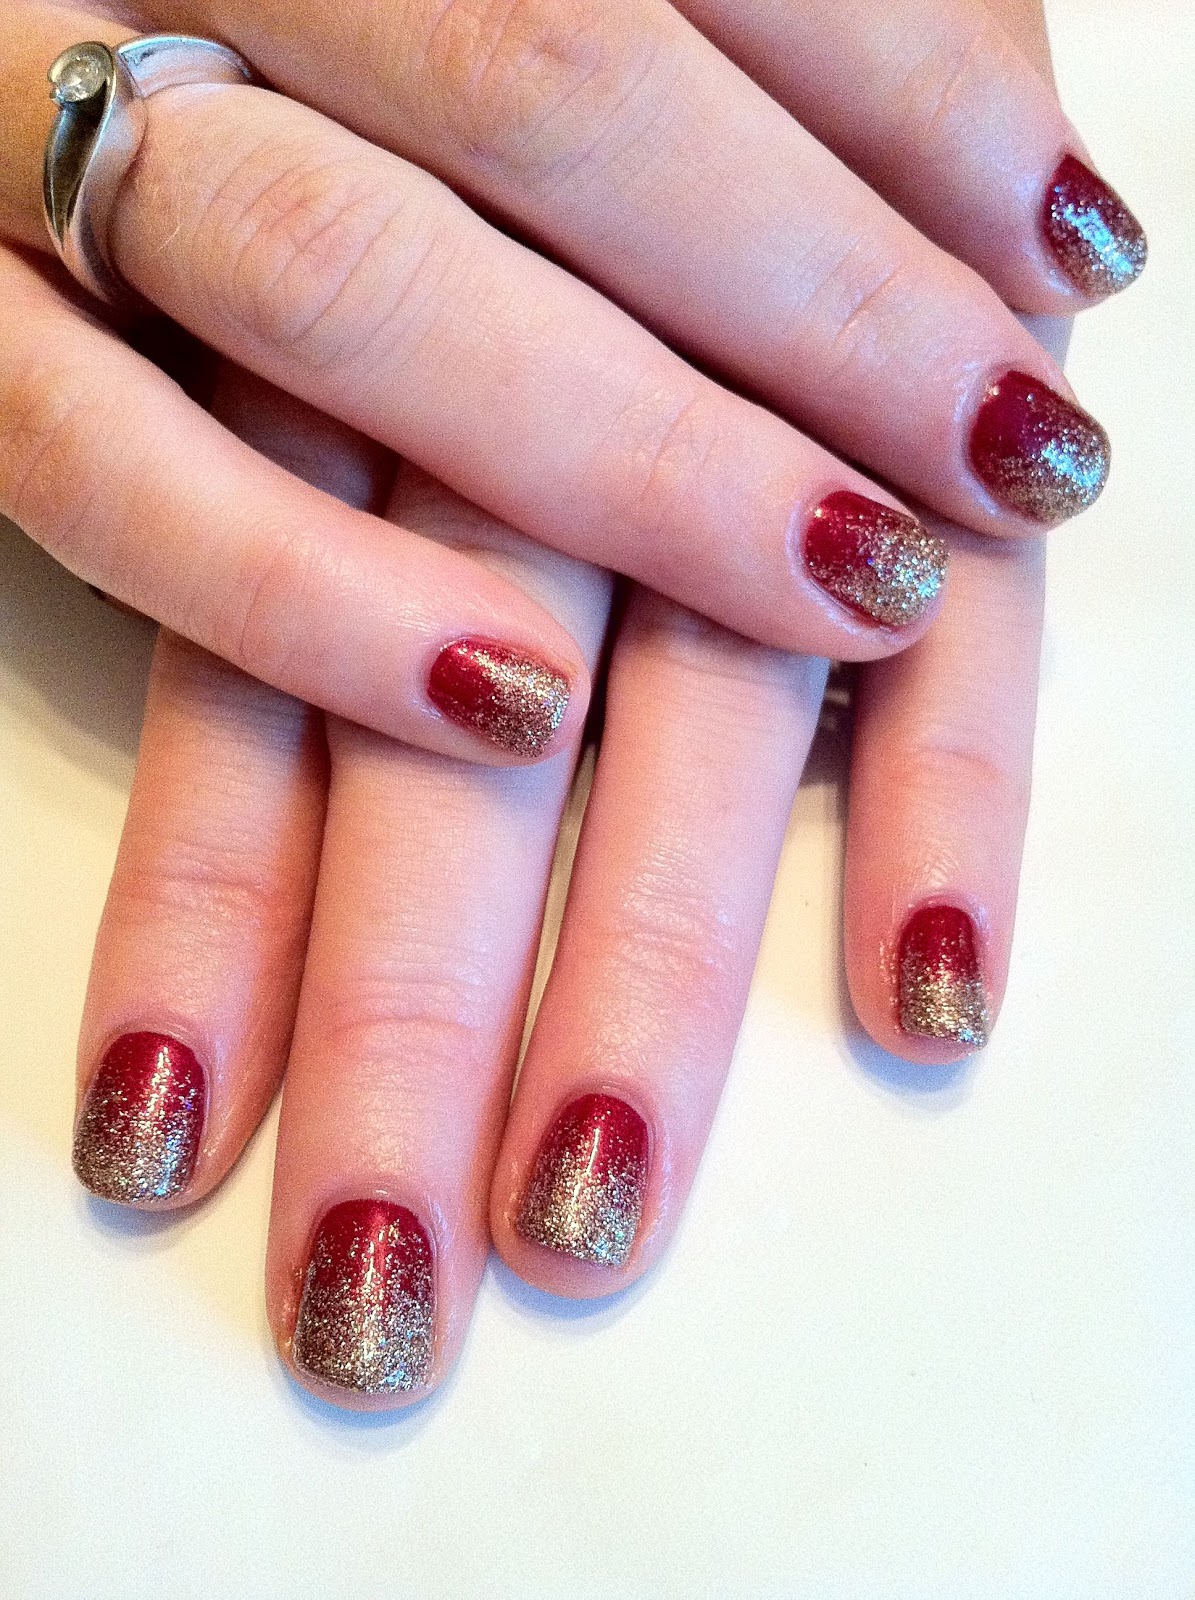 Brush up and Polish up! Christmas nails it's all about the Red...